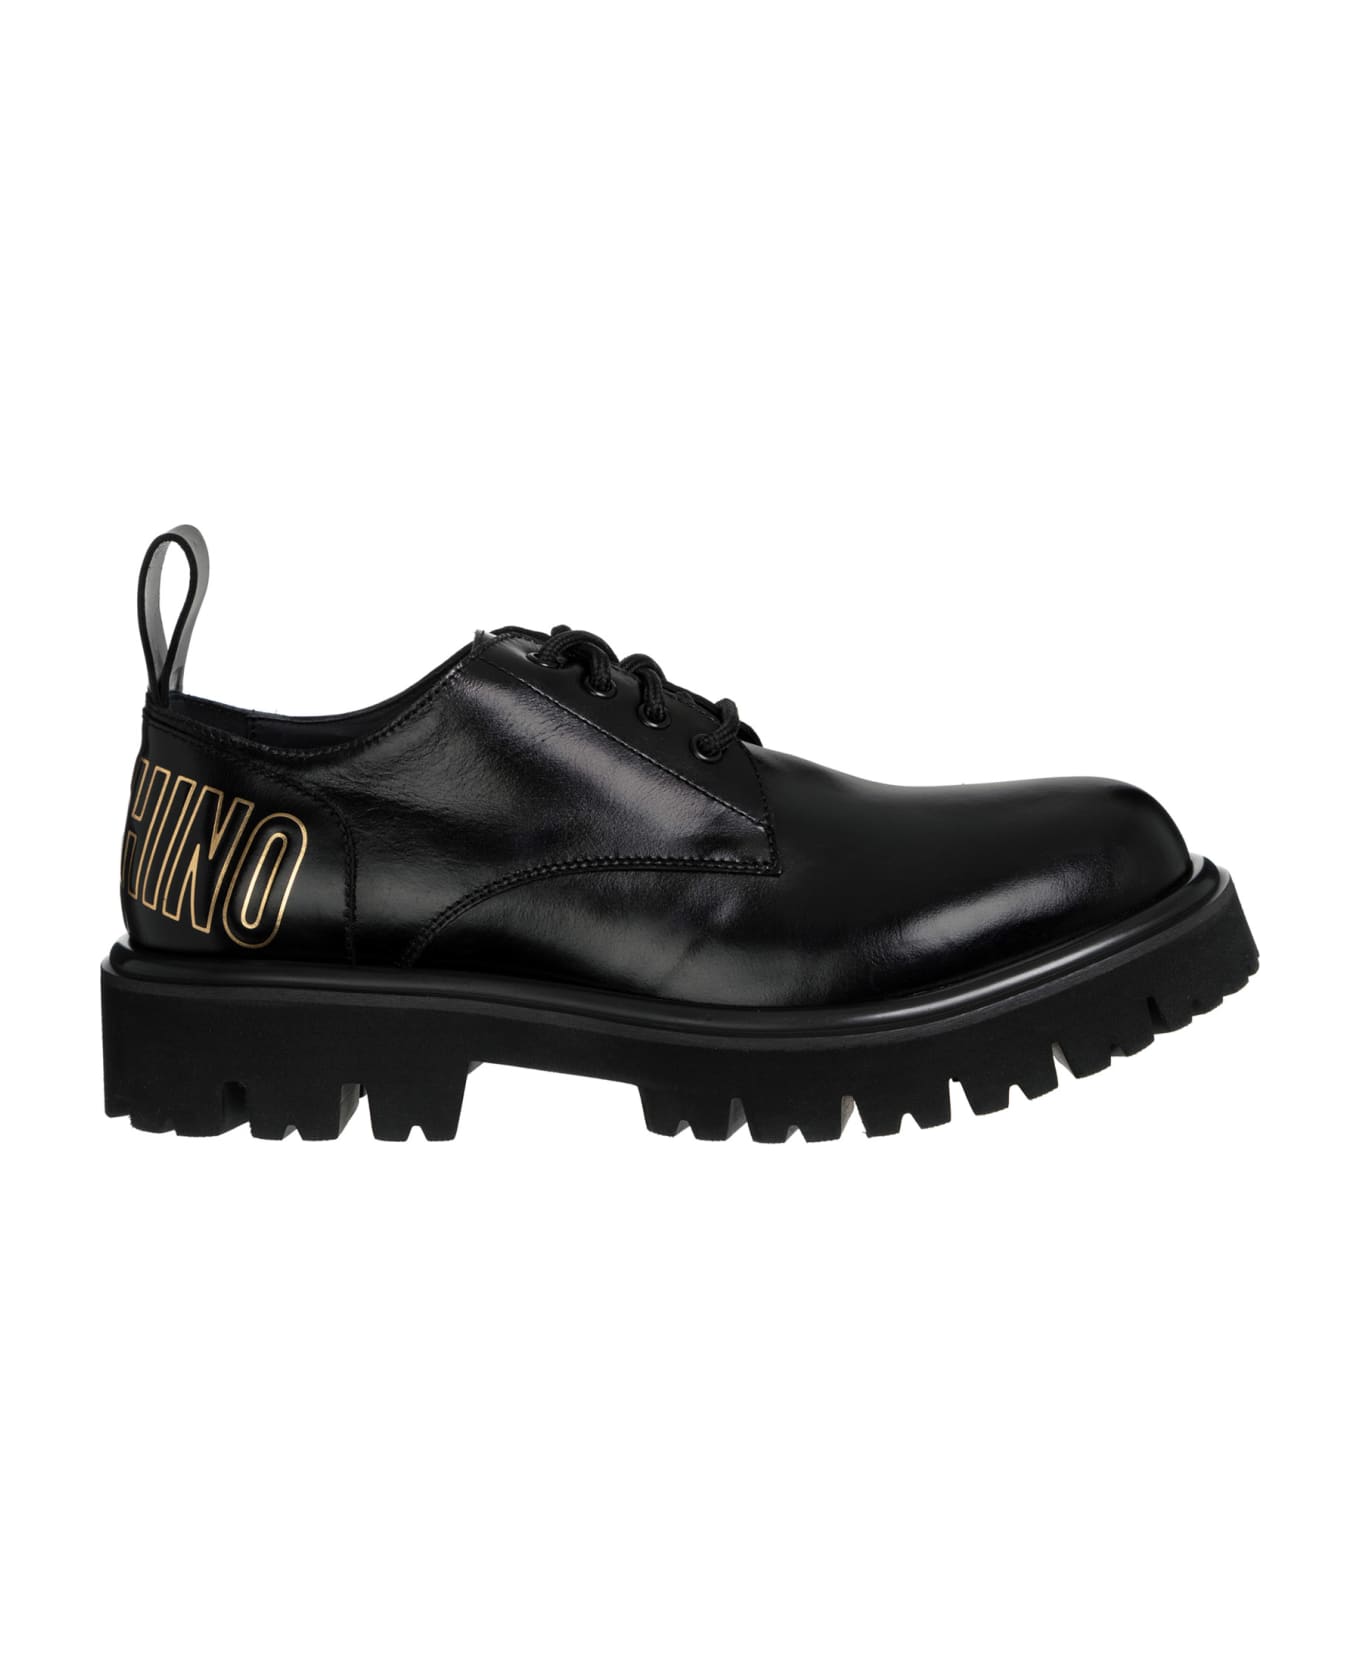 Moschino Leather Derby Shoes - Nero